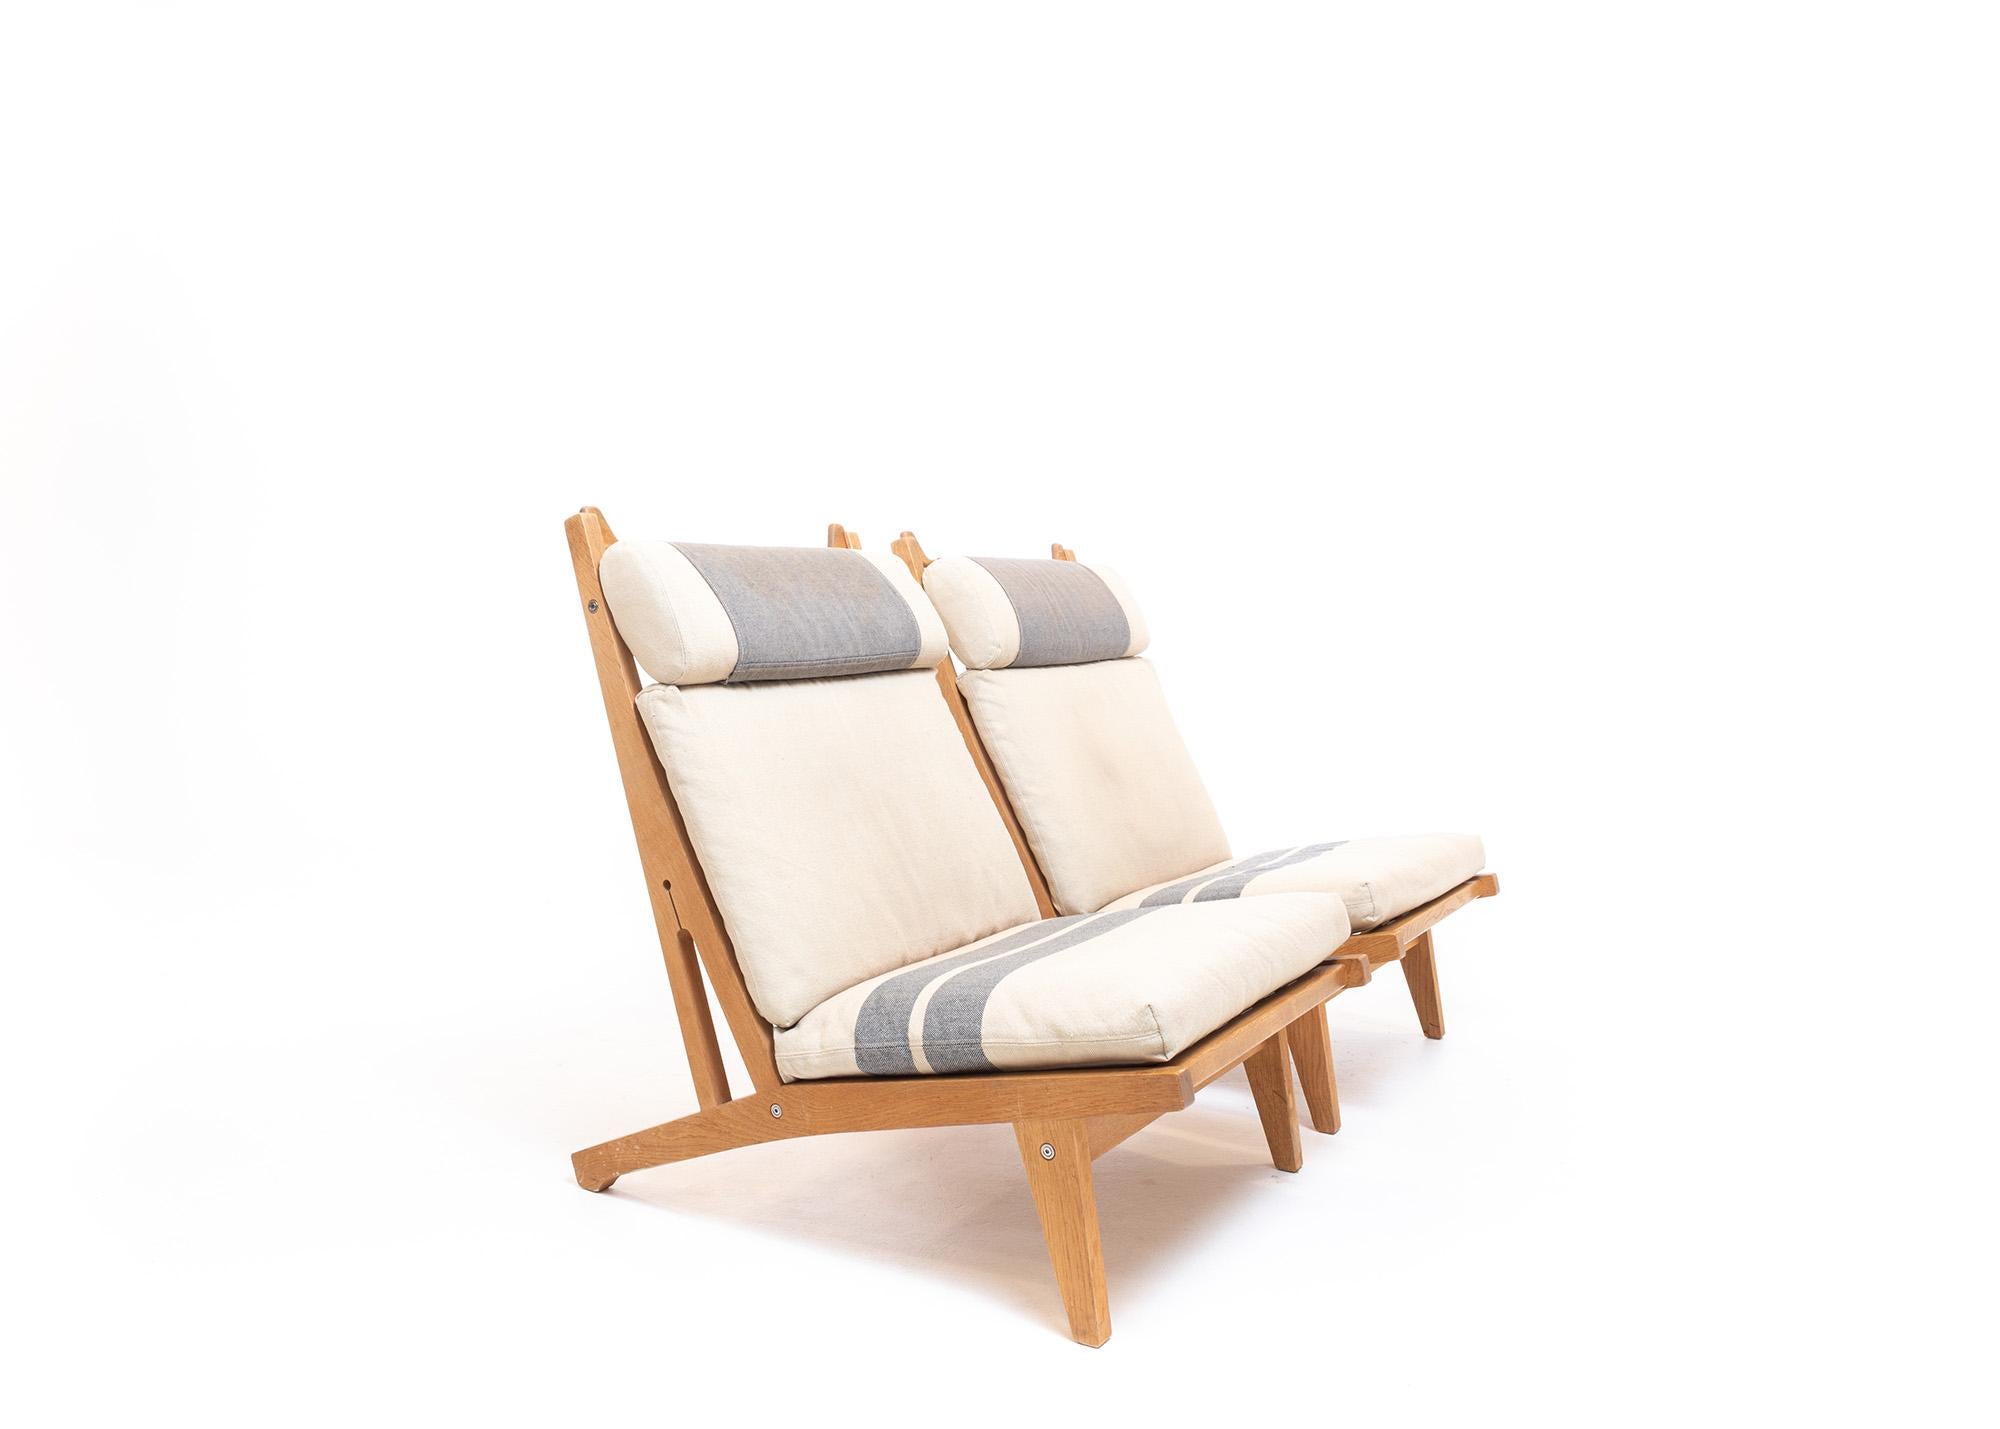 Hans Wegner's GE-370 lounge chair is an iconic piece of mid-century modern design that captures the essence of Danish craftsmanship and style. This beautiful lounge chair was designed by Hans J. Wegner in the 1960s and was a part of his famous GE